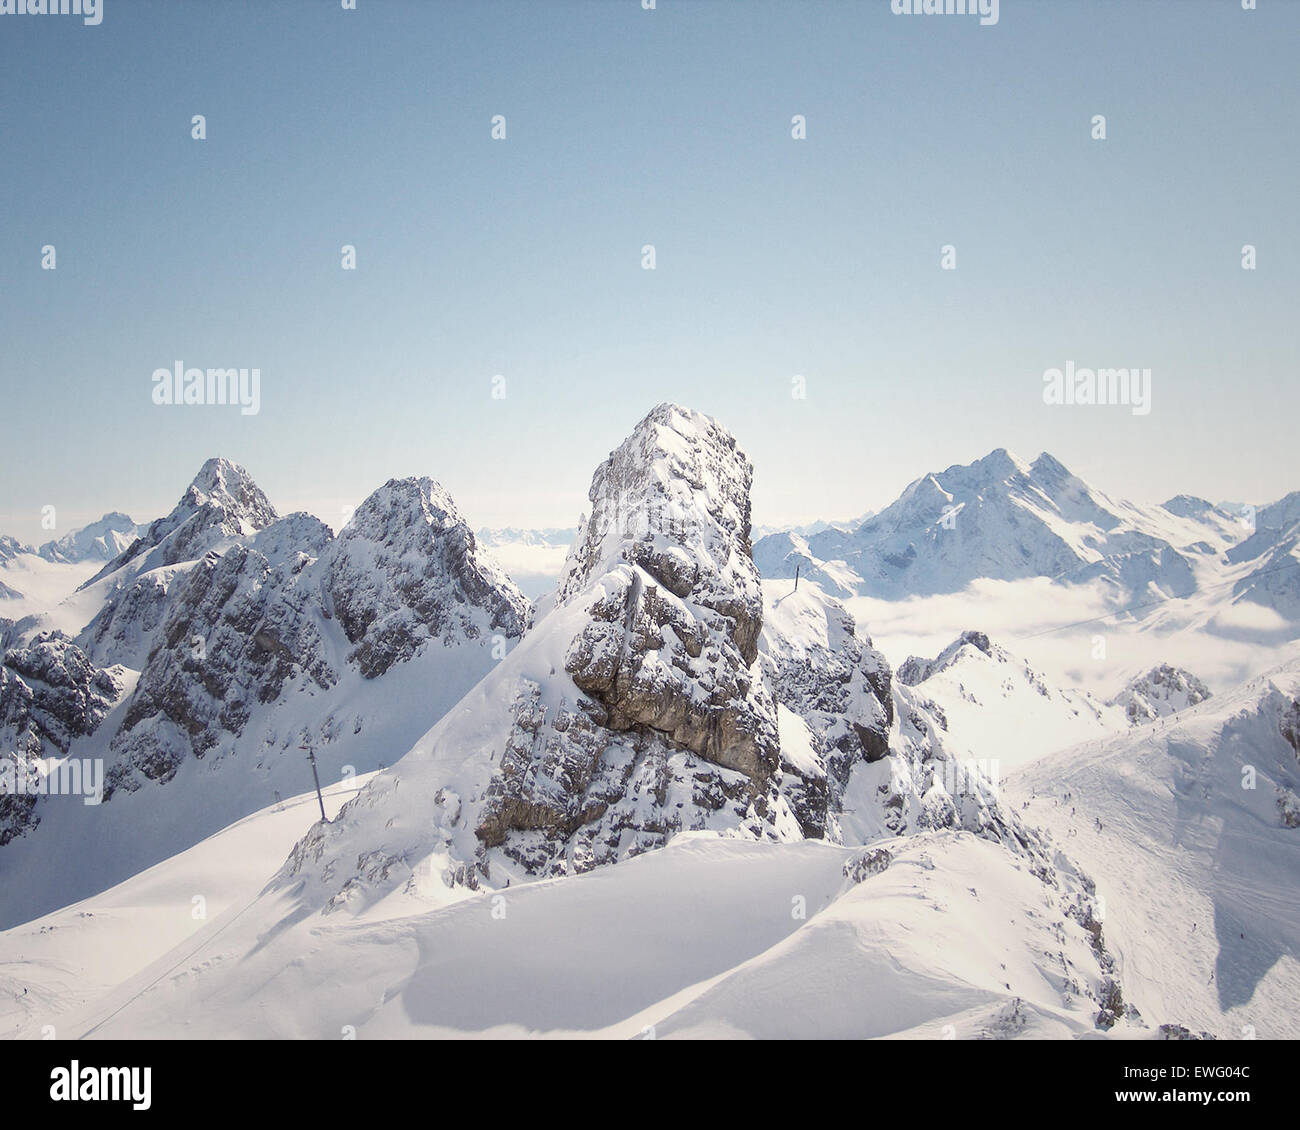 Snow Covered Mountain Landscape Stock Photo